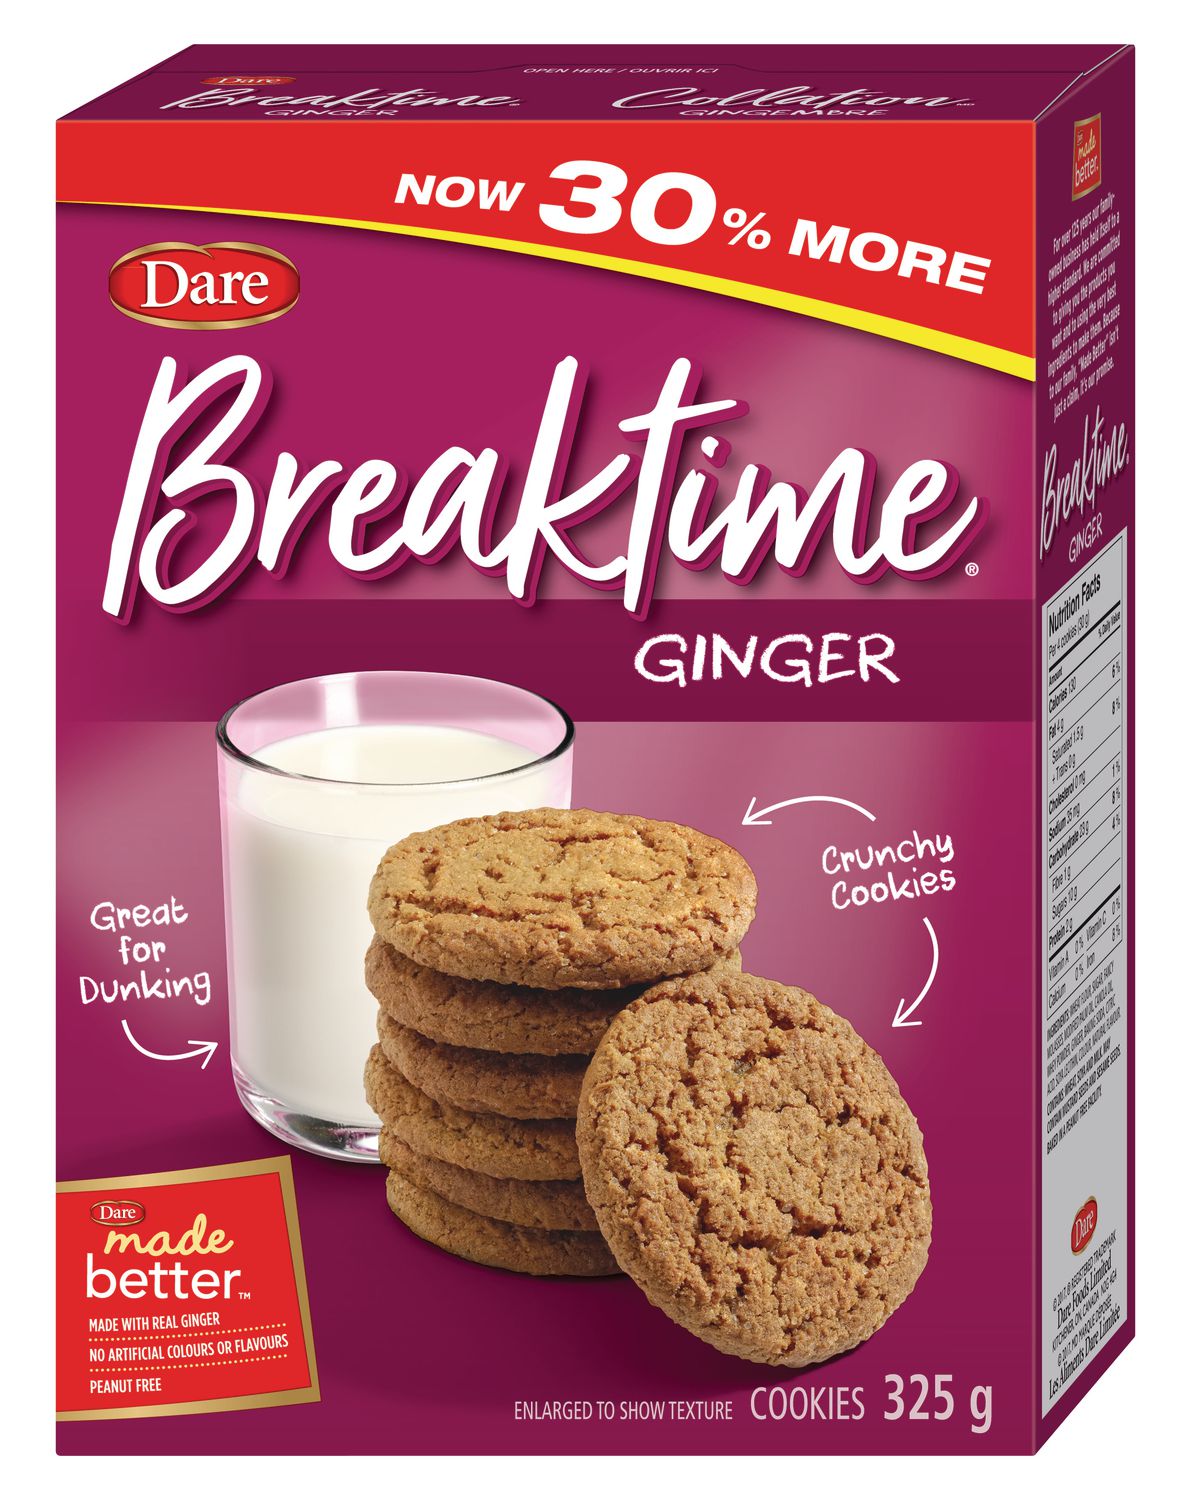 are breaktime ginger cookies healthy